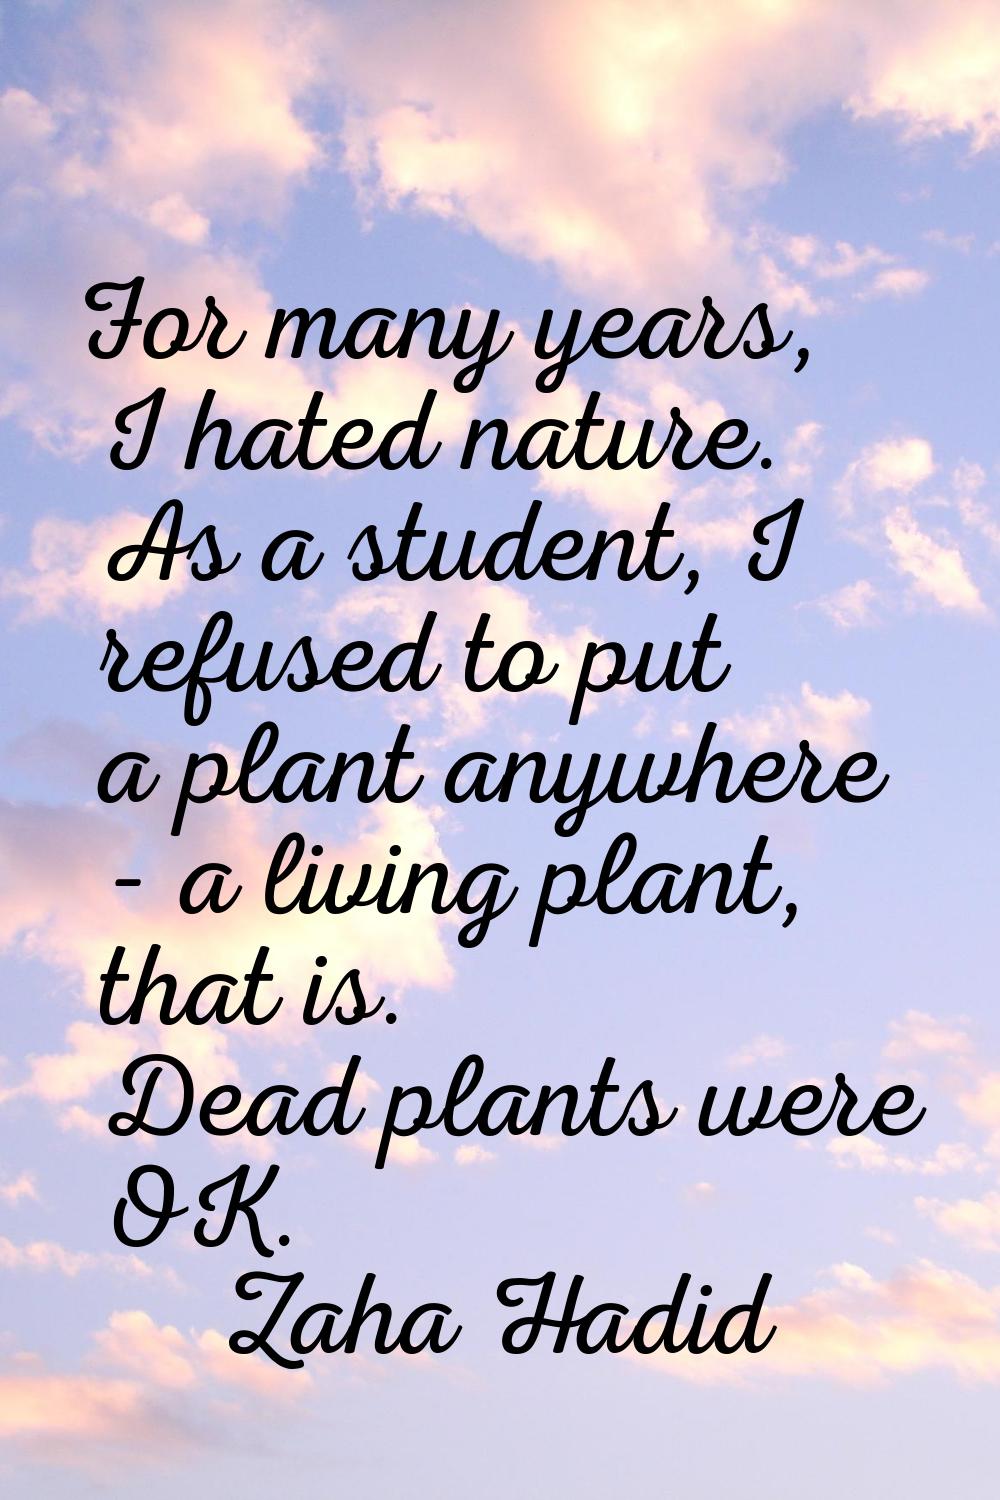 For many years, I hated nature. As a student, I refused to put a plant anywhere - a living plant, t